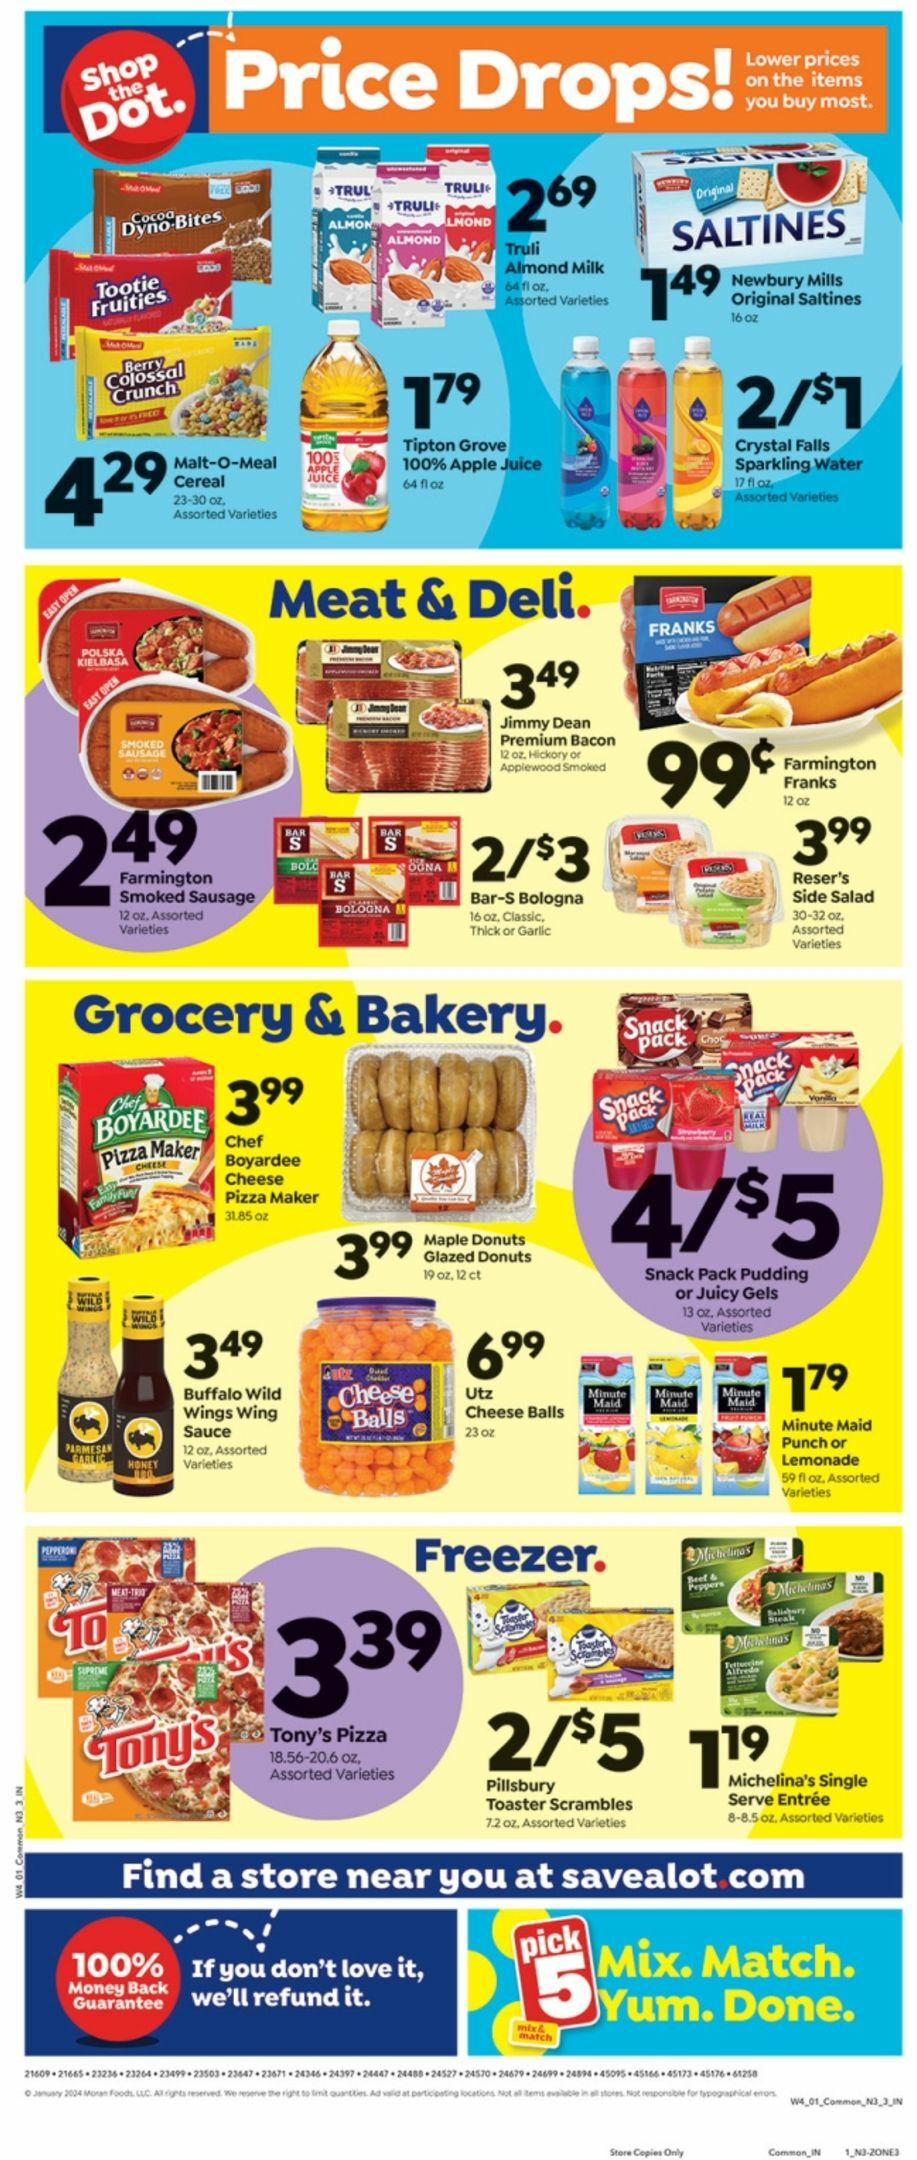 Save A Lot Weekly Ad from January 24